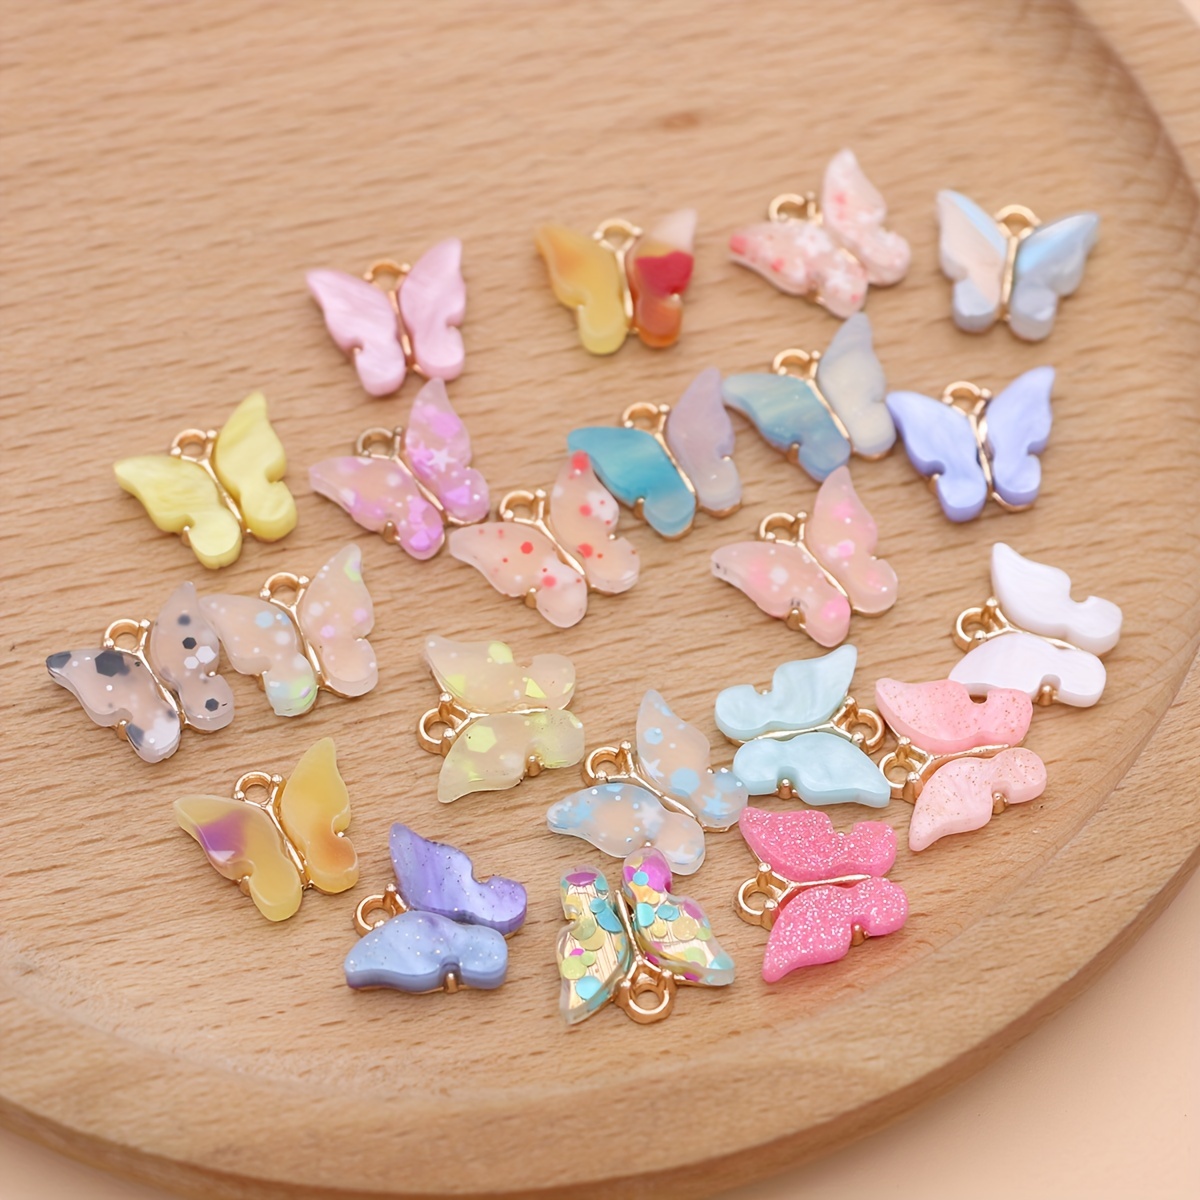 LiQunSweet 100 Pcs Butterfly Charm 11mm Crystal Glass Animal Charms for  Women Girls Jewellery Making DIY Crafts Accessories